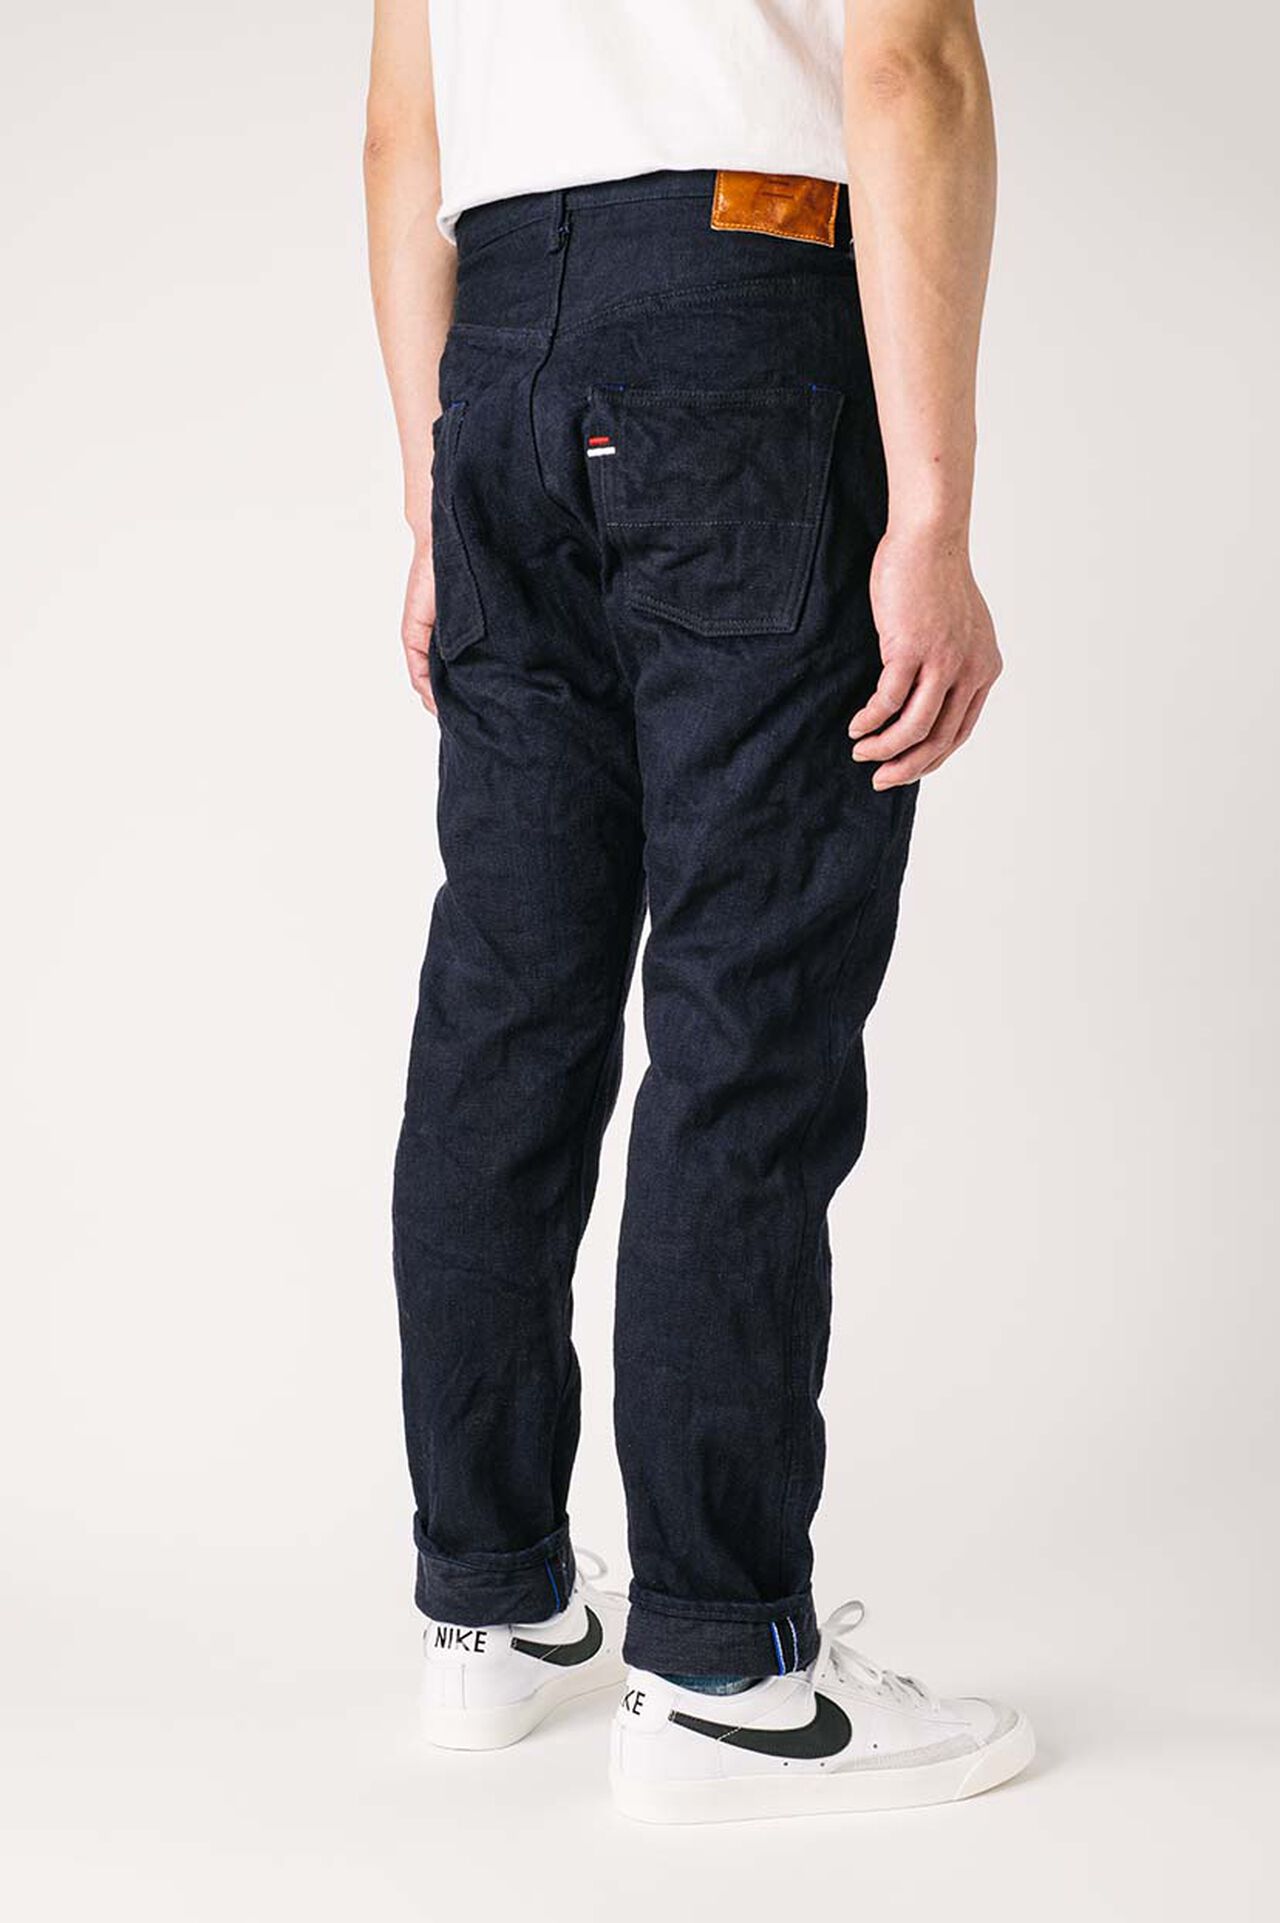 SI2027HT
"Sizima" 19oz High Tapered Jeans,, large image number 3